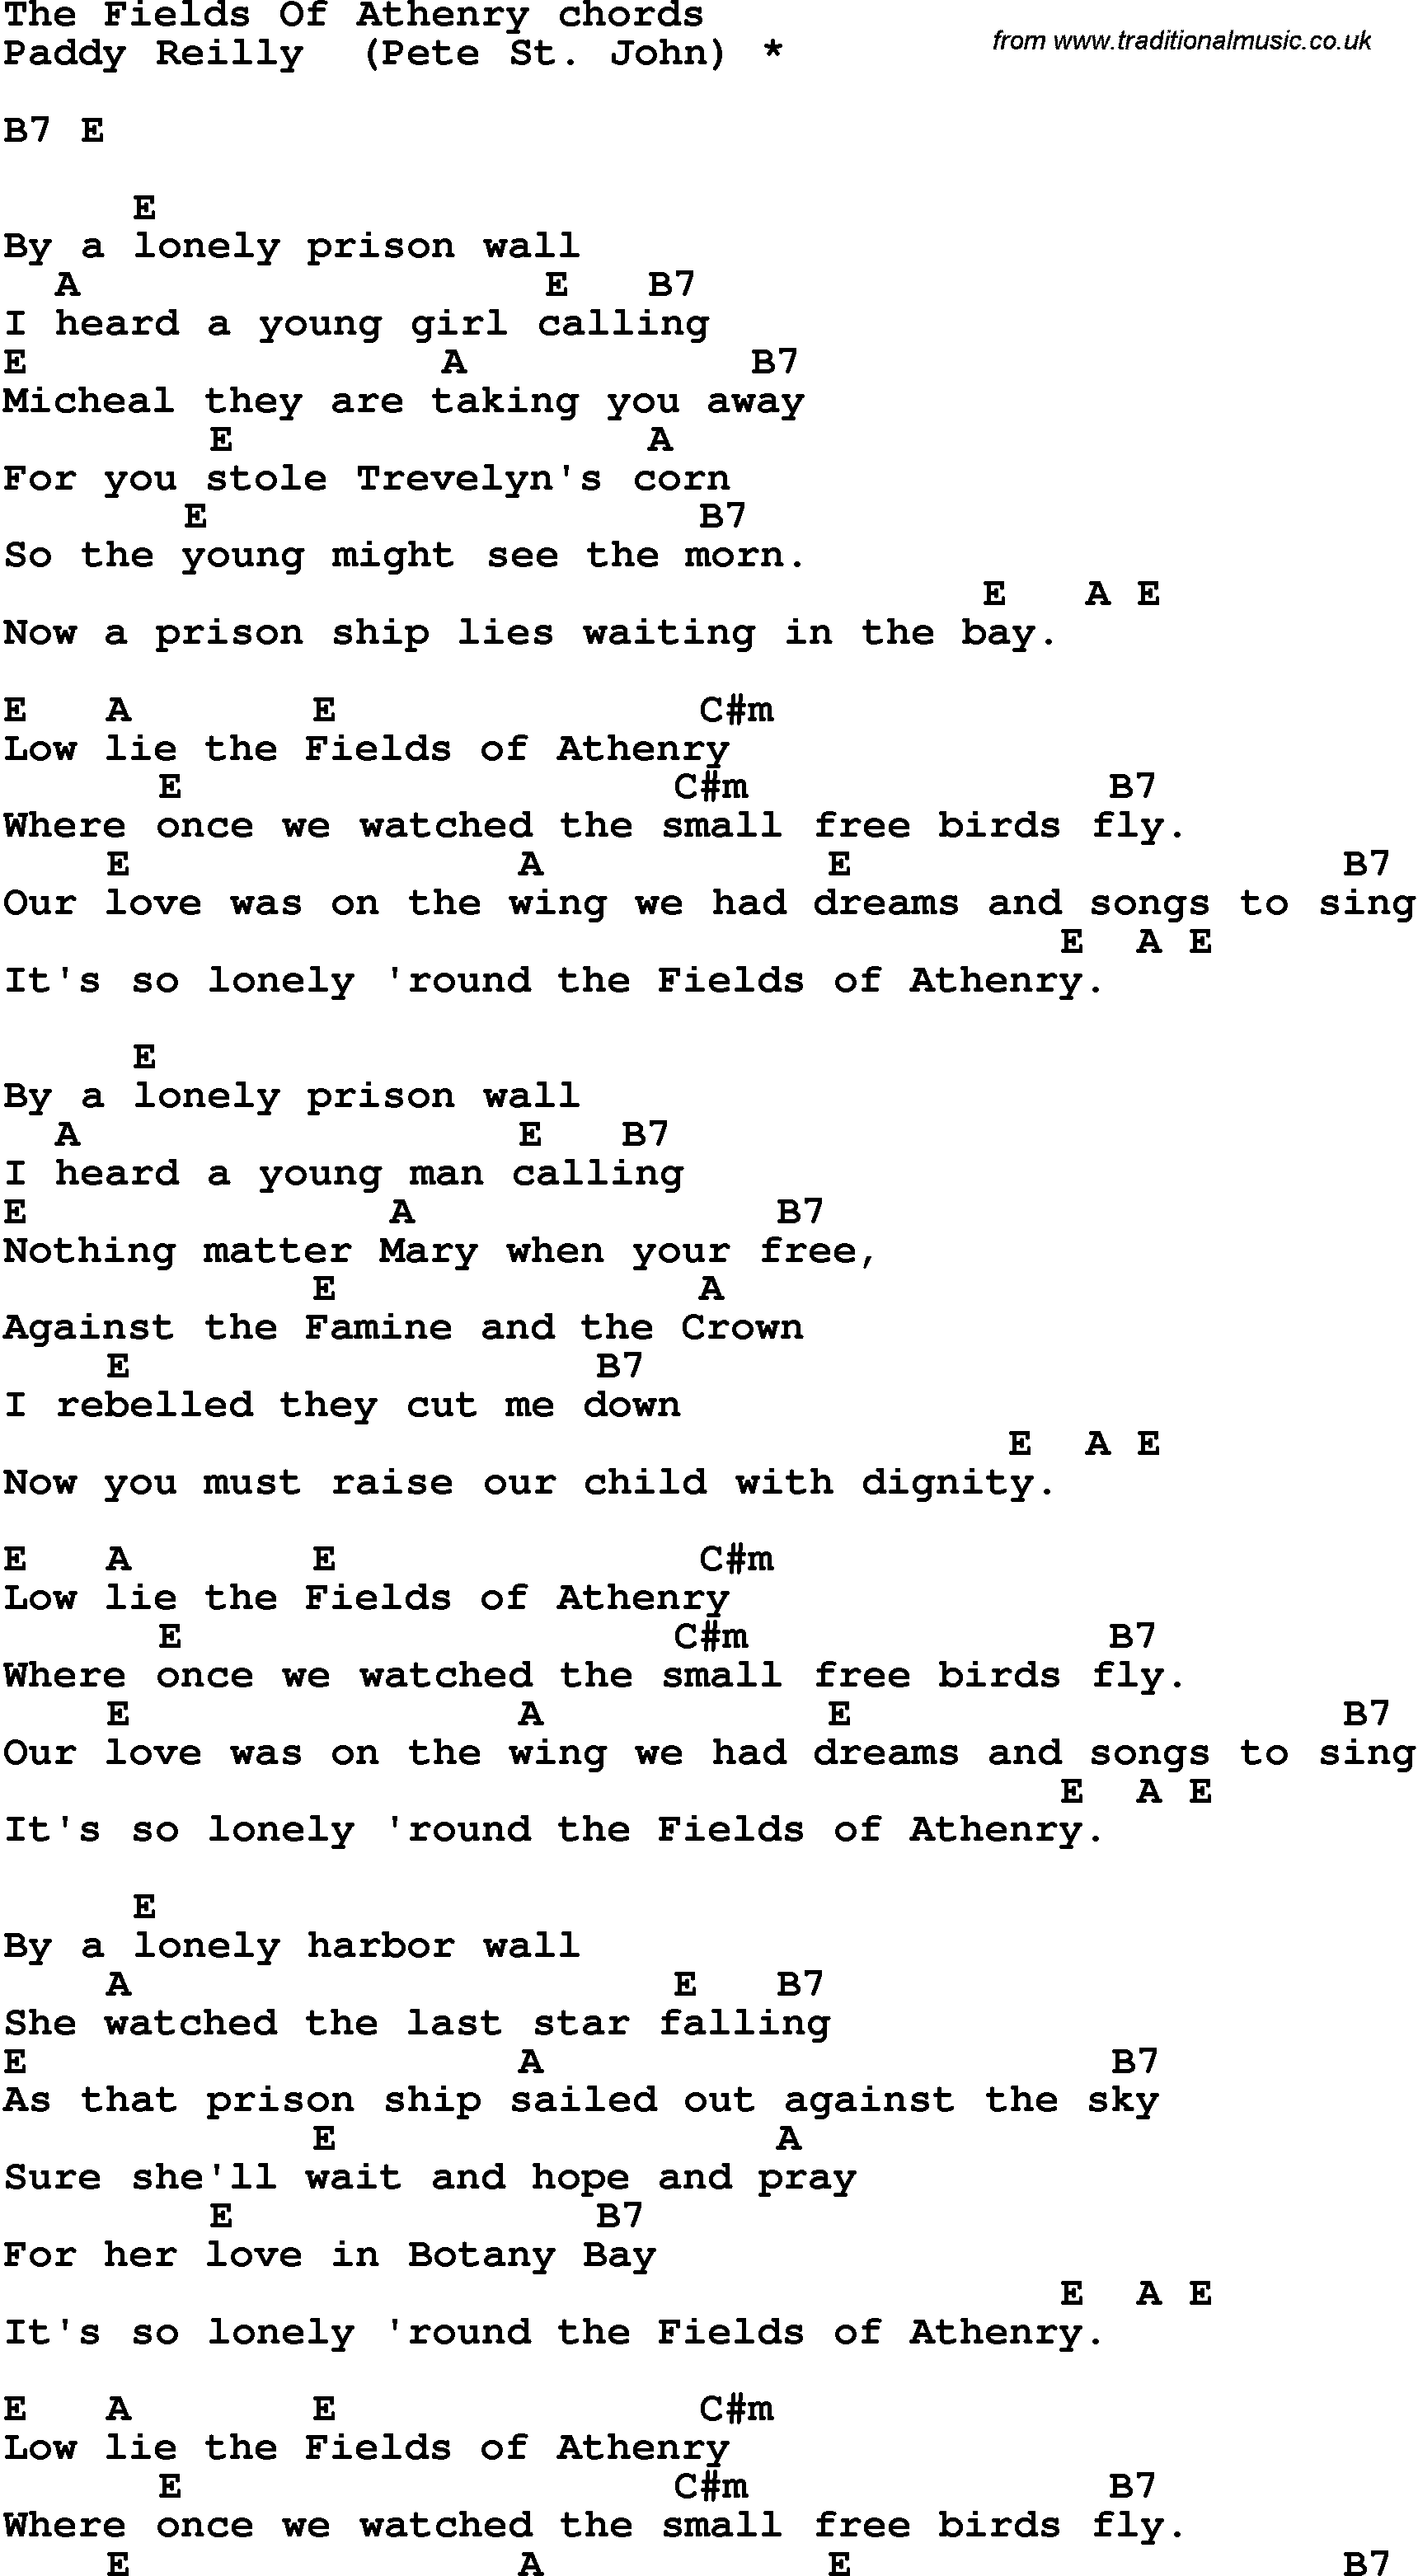 Song Lyrics with guitar chords for The Fields Of Athenry